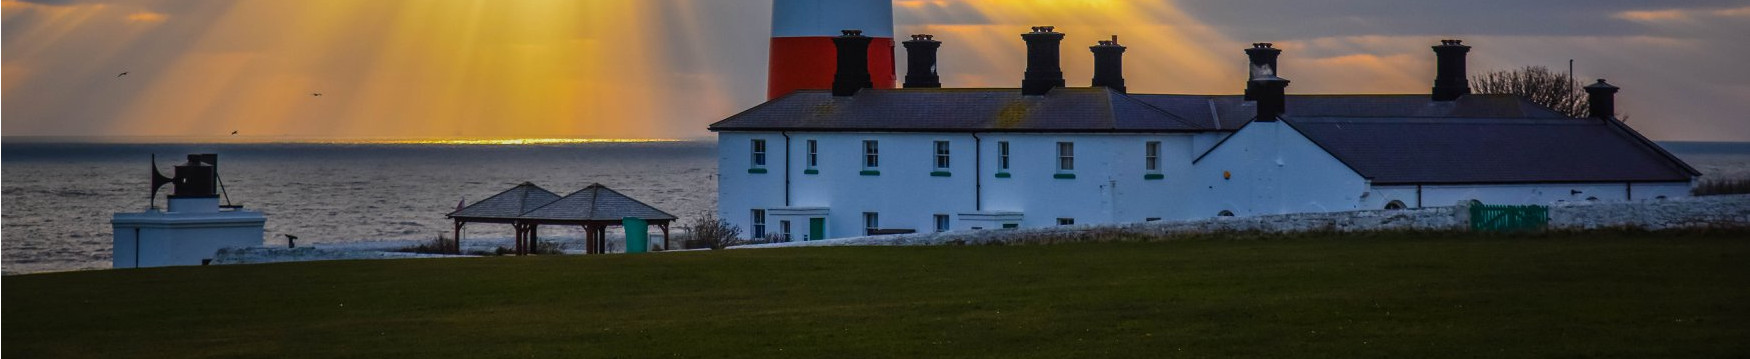 Dawn breaks behind the base of a lighthouse and a row of houses. Photo by Trevor Liddell